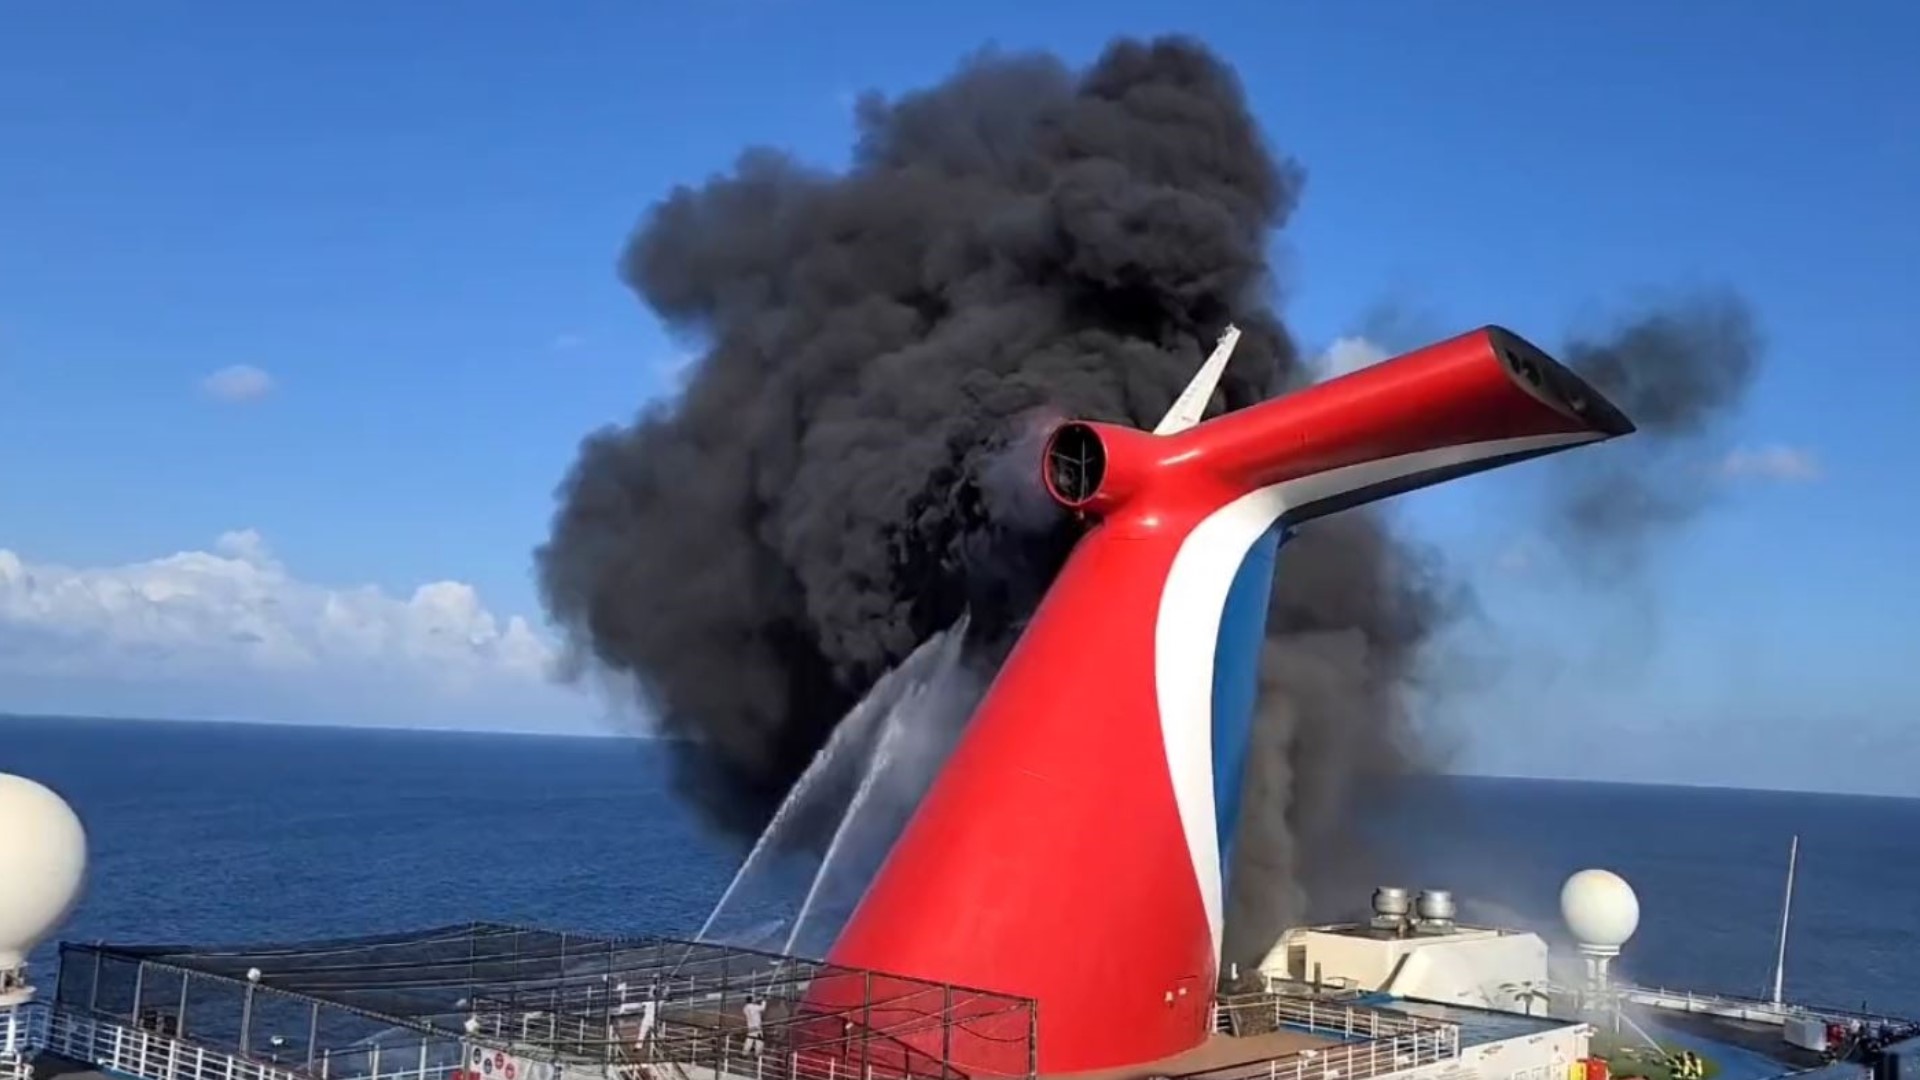 carnival cruise freedom on fire